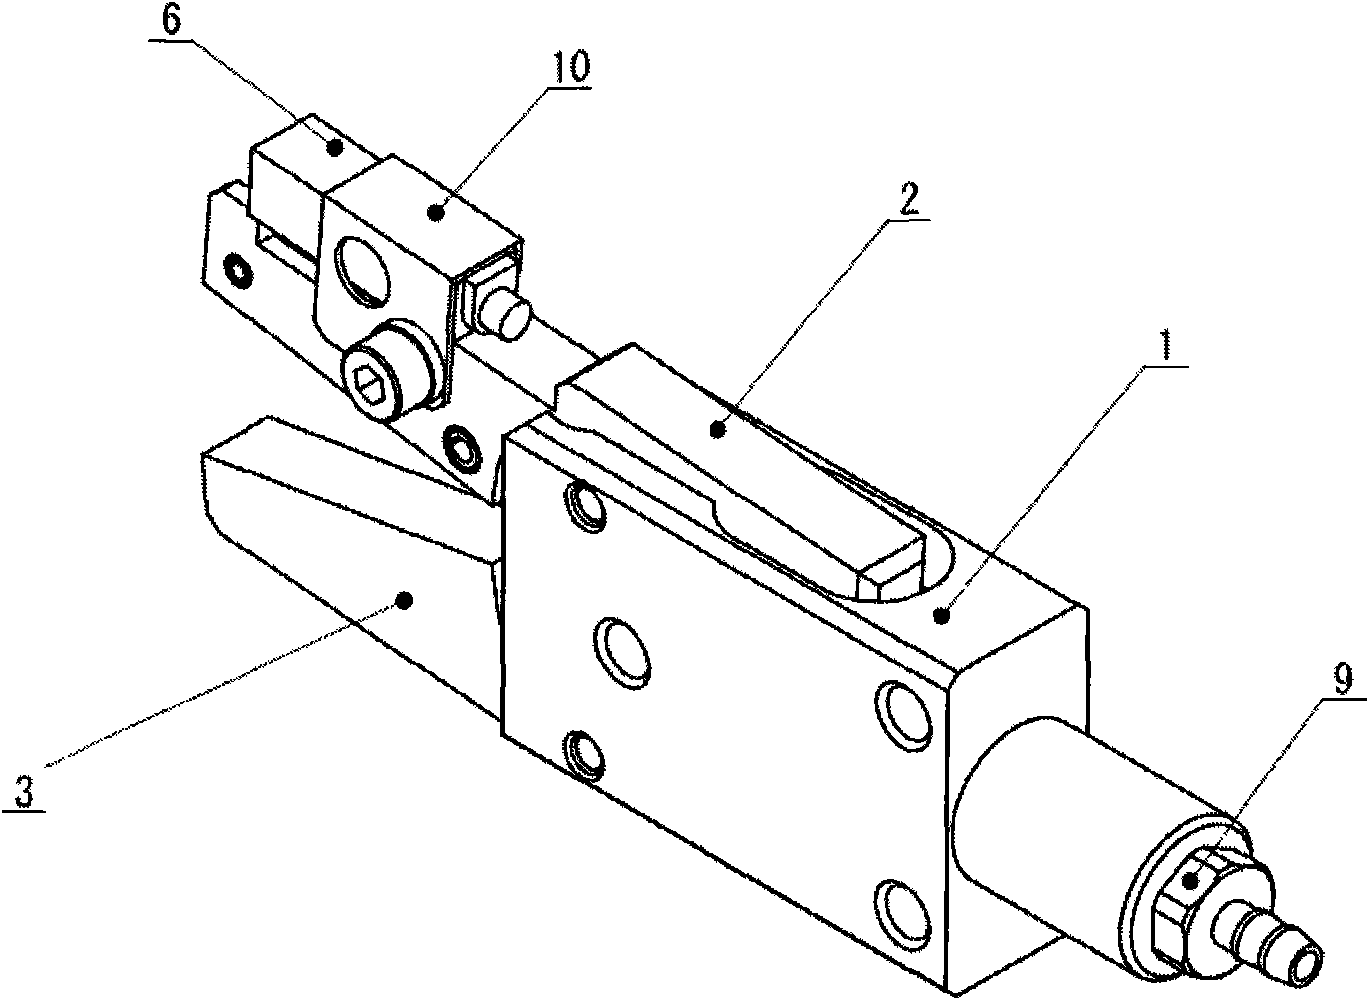 Flow channel clamp